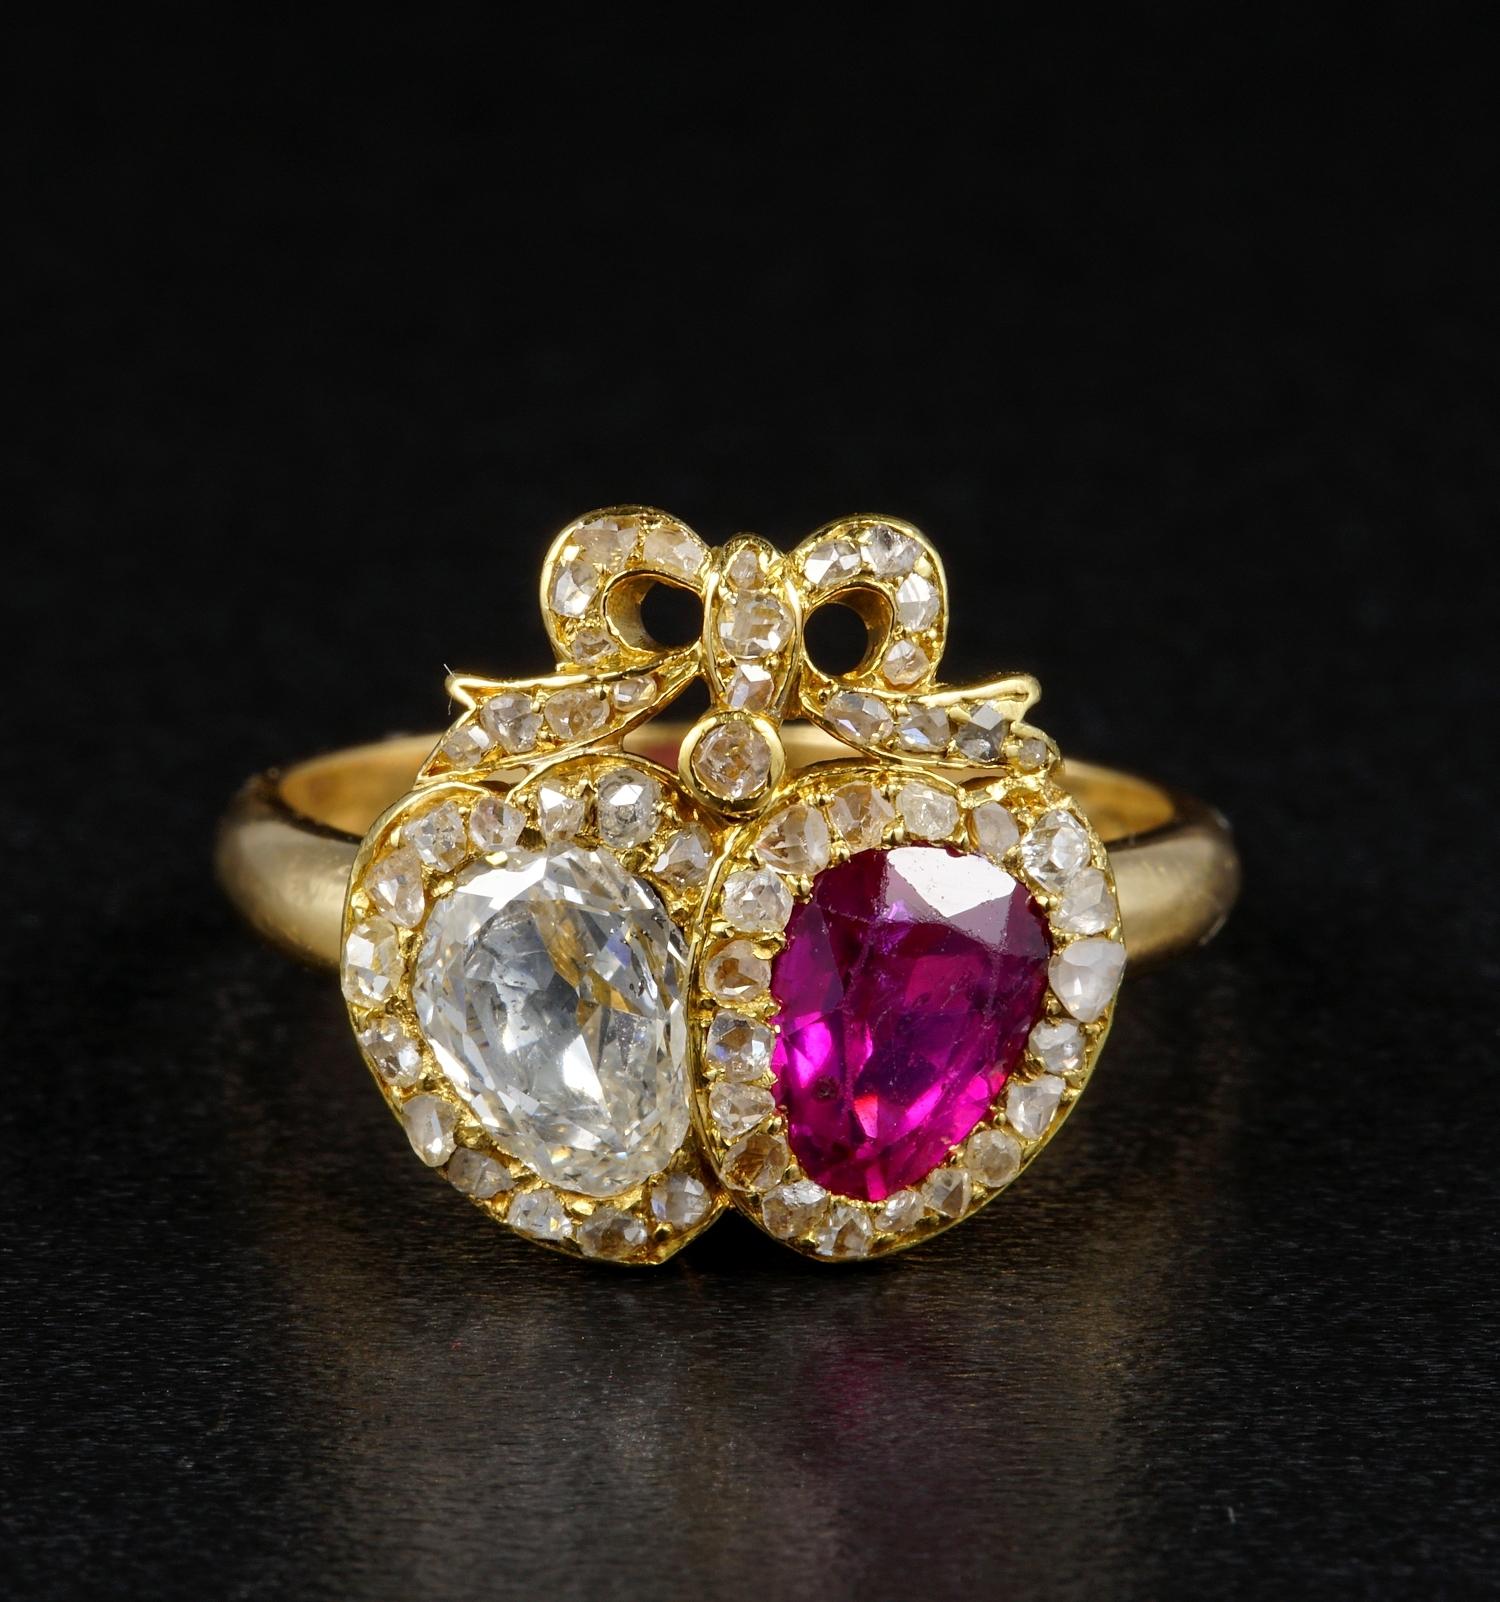 Double hearts set side by side meant “bound together” and were traditionally set with gemstones and used for betrothal in the 1800s
Some of the gems that appear in combination in these antique rings include diamonds for endurance, rubies for passion